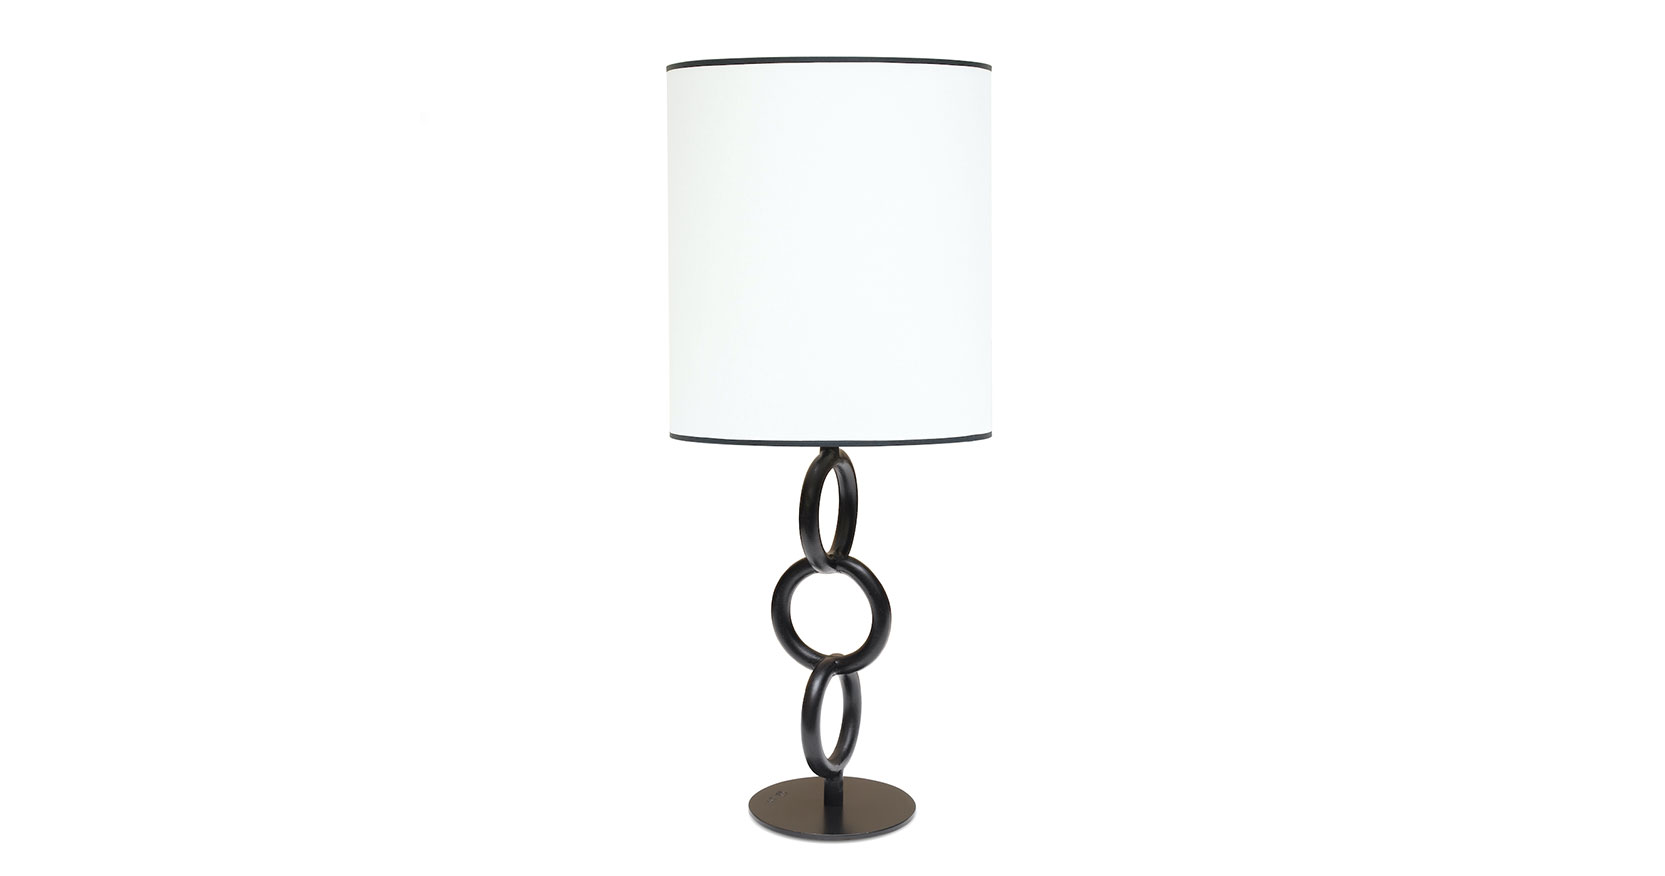 Christian Ghion, lamp in black wrought iron, 3 rings on a circular base, cylindric white lamp shade with a black trim top and bottom